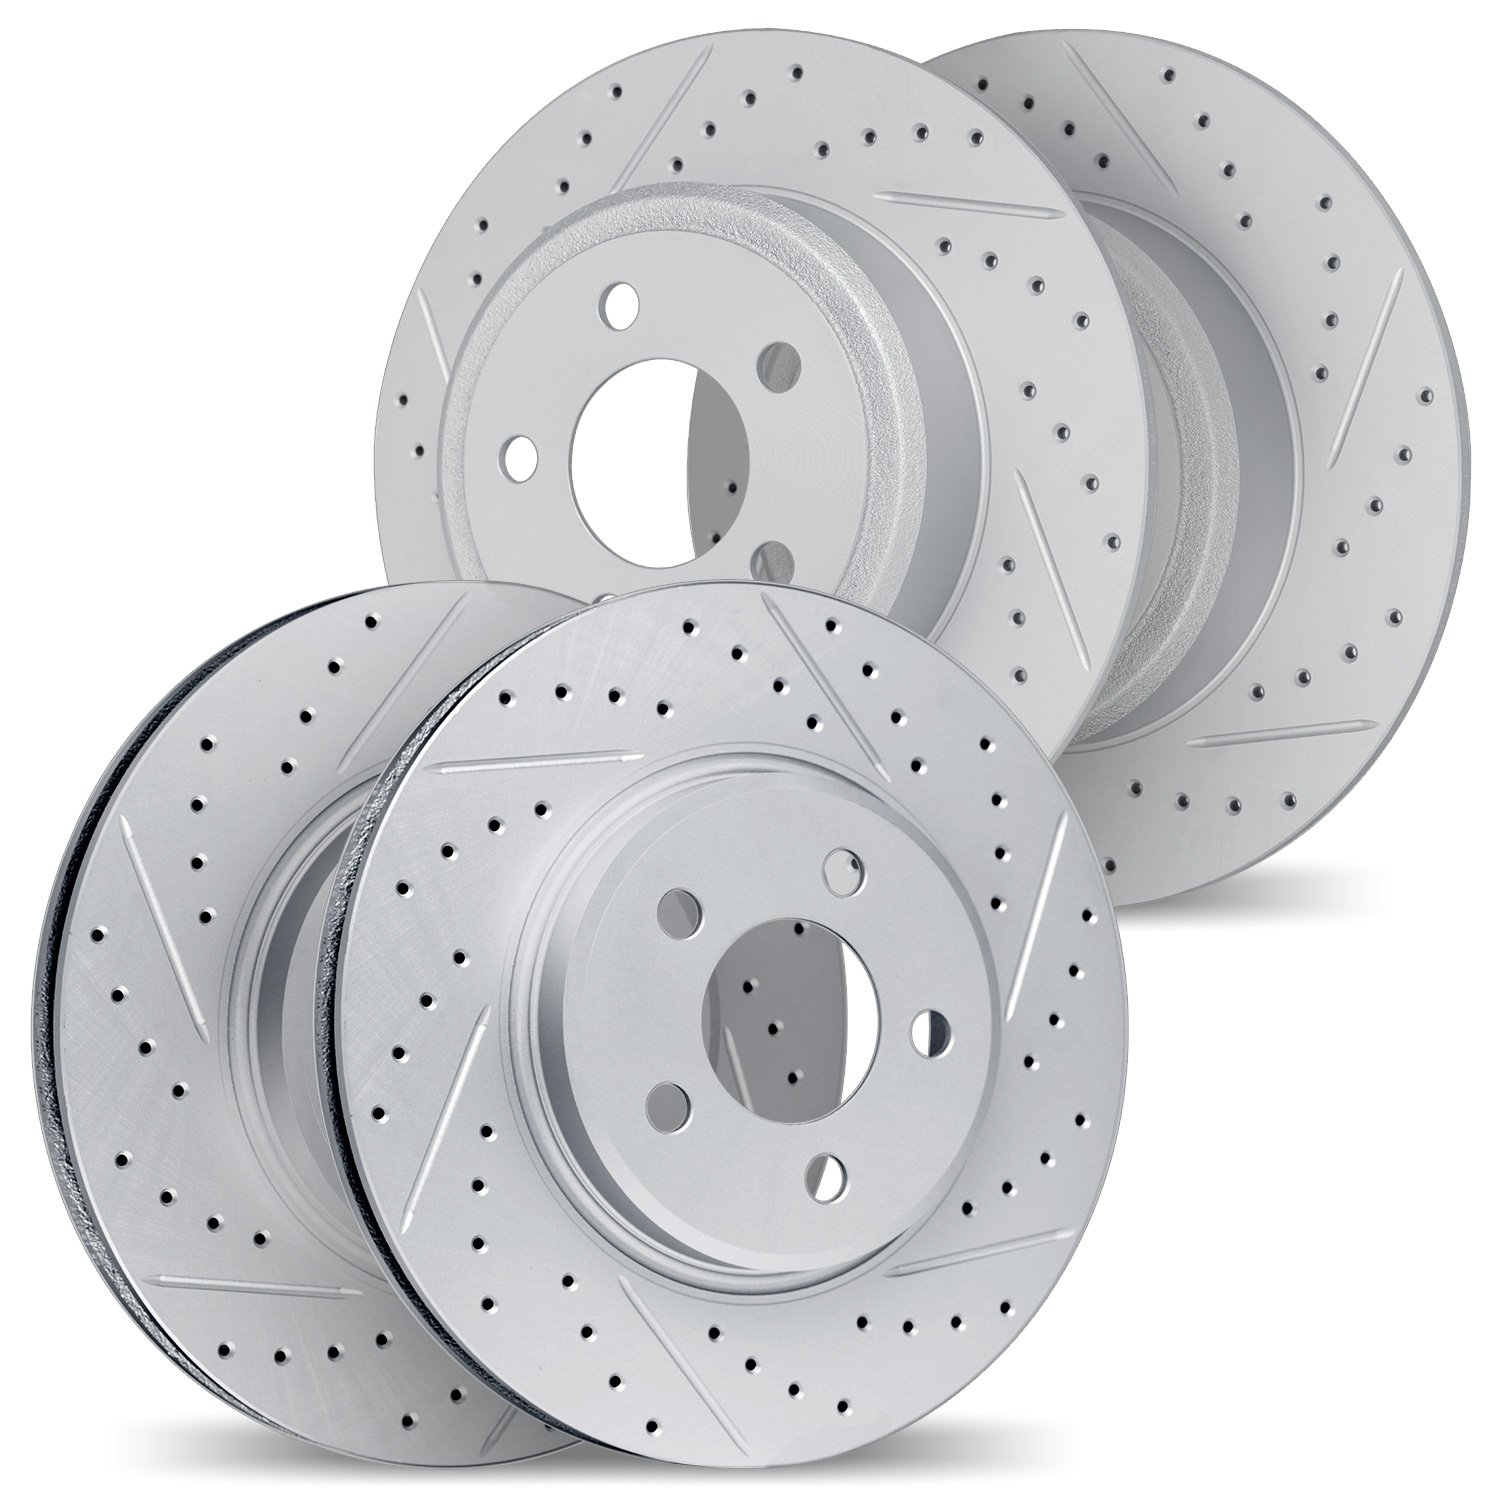 2004-72001 Geoperformance Drilled/Slotted Brake Rotors, 1994-2000 Multiple Makes/Models, Position: Front and Rear